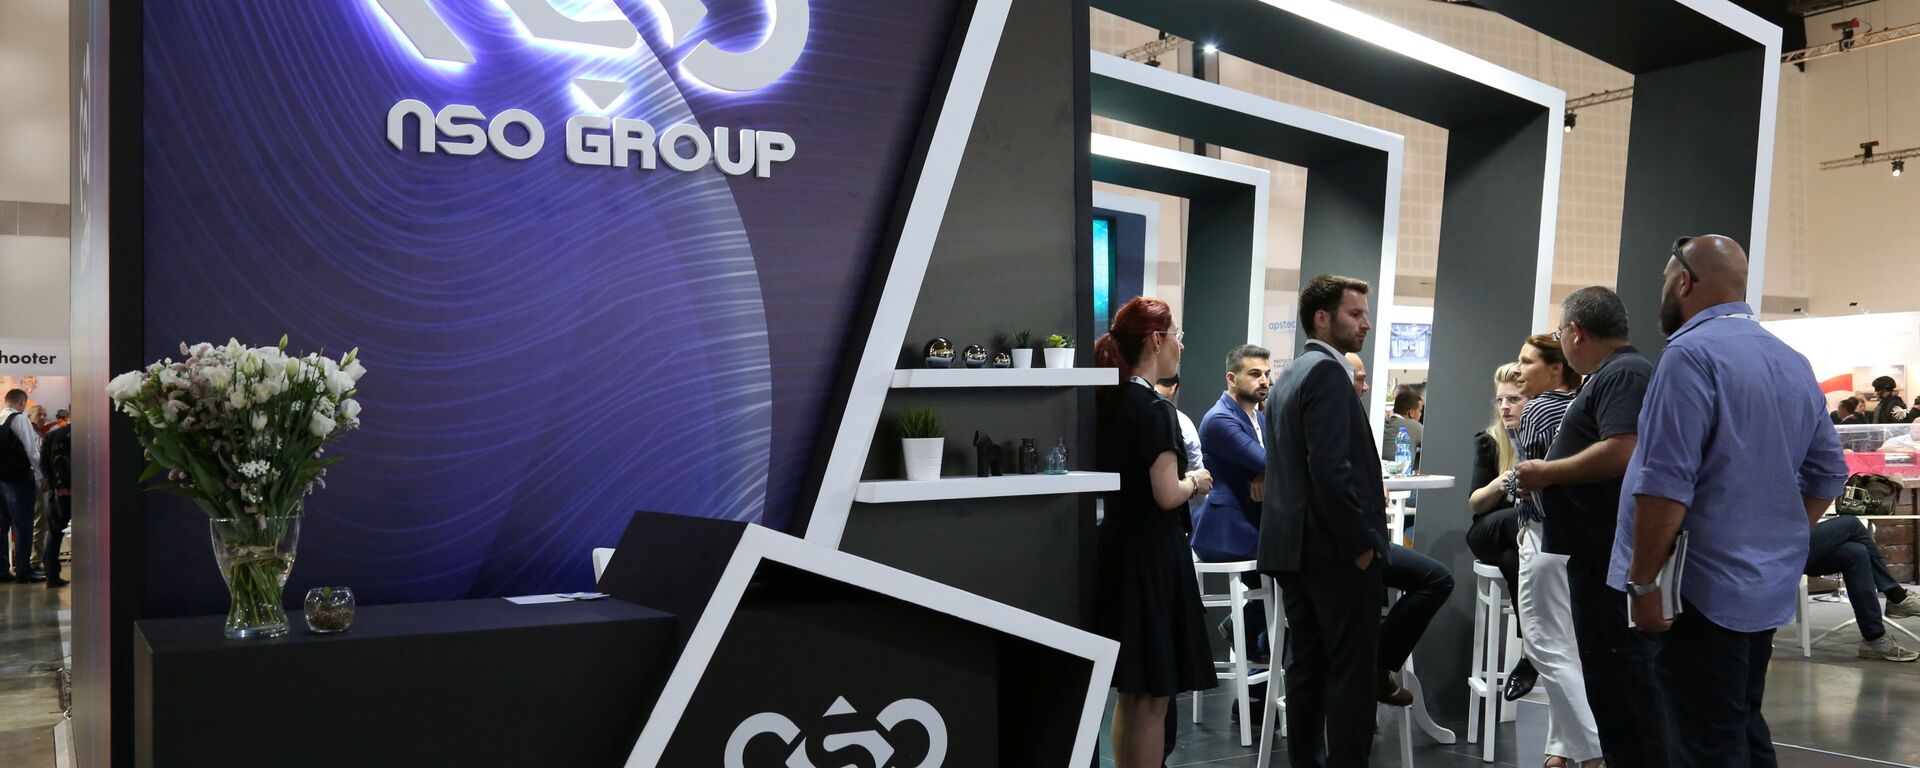 Israeli cyber firm NSO Group's exhibition stand is seen at ISDEF 2019, an international defence and homeland security expo, in Tel Aviv, Israel June 4, 2019. Picture taken June 4, 2019. - Sputnik International, 1920, 23.11.2021